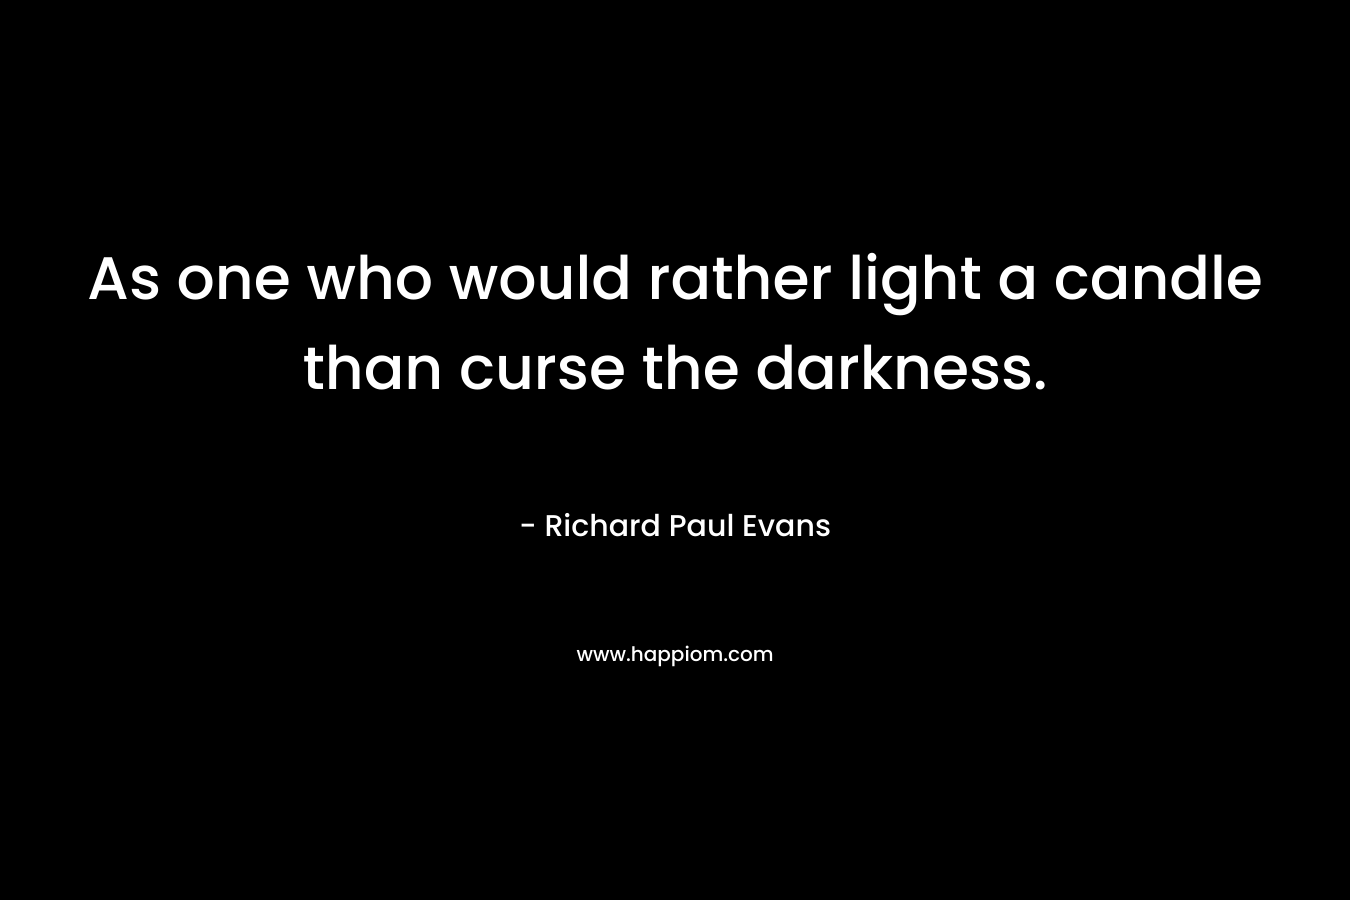 As one who would rather light a candle than curse the darkness.